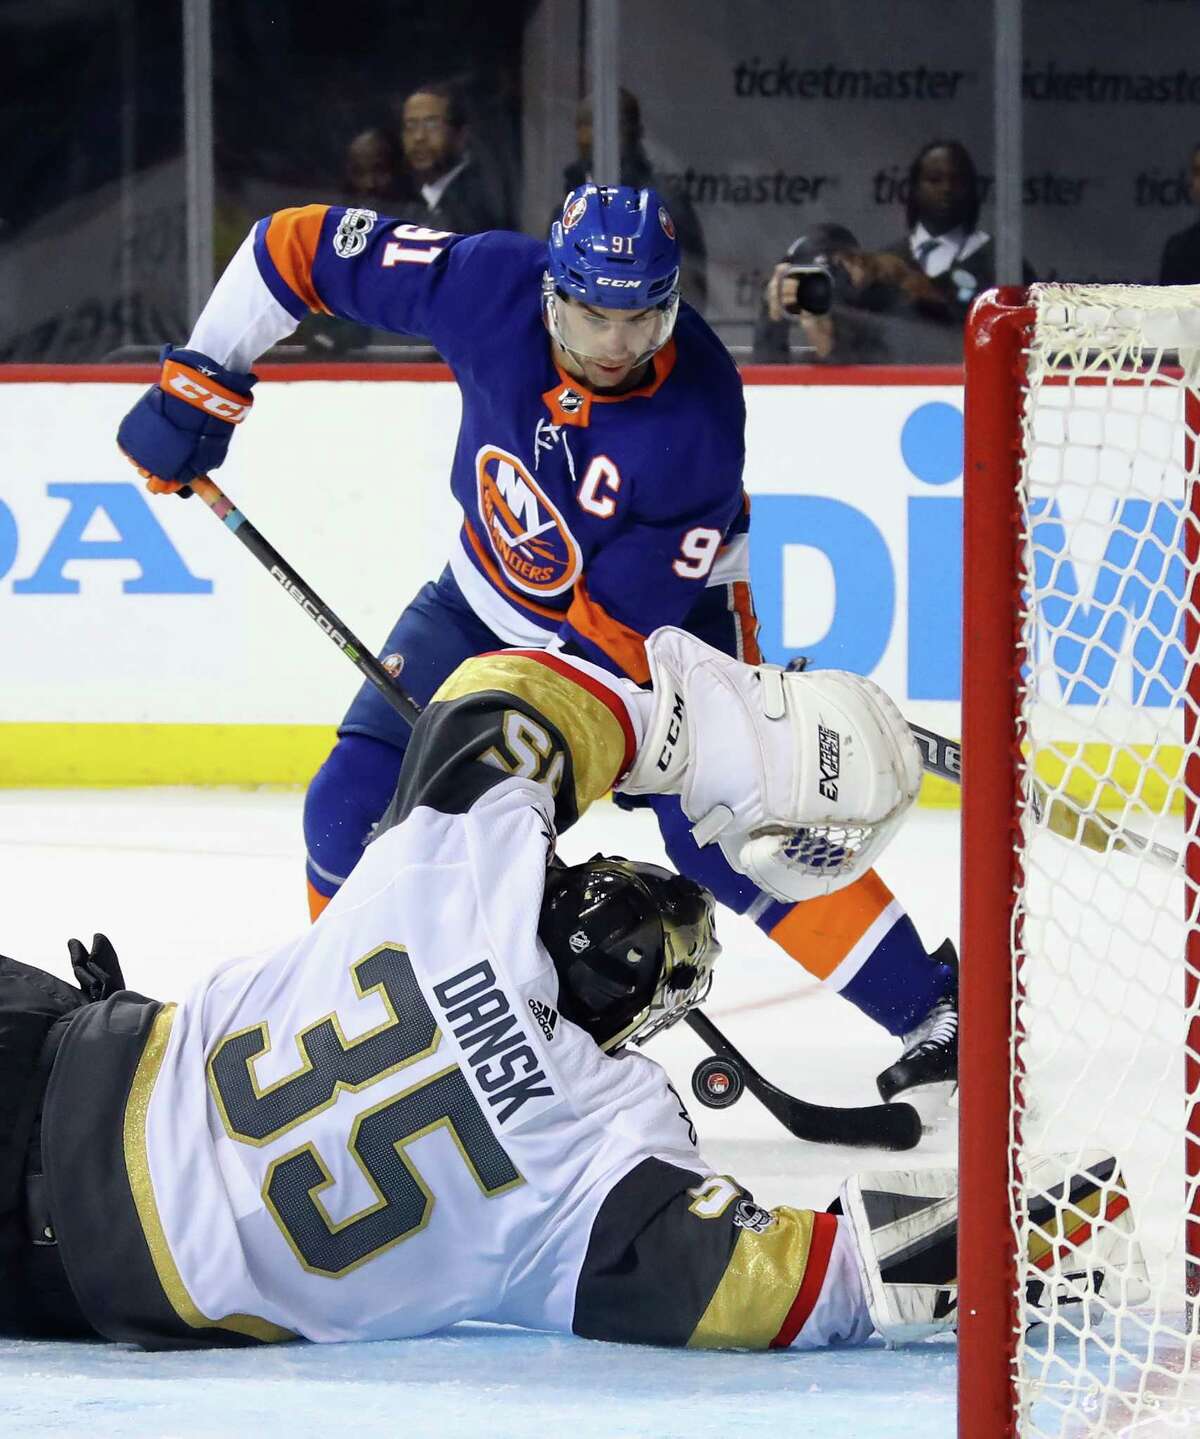 NEW YORK, NY - OCTOBER 30: Oscar Dansk #35 of the Vegas Golden Knights blocks the net against John Tavares #91 of the New York Islanders during the second period at the Barclays Center on October 30, 2017 in the Brooklyn borough of New York City. (Photo by Bruce Bennett/Getty Images) ORG XMIT: 775040725